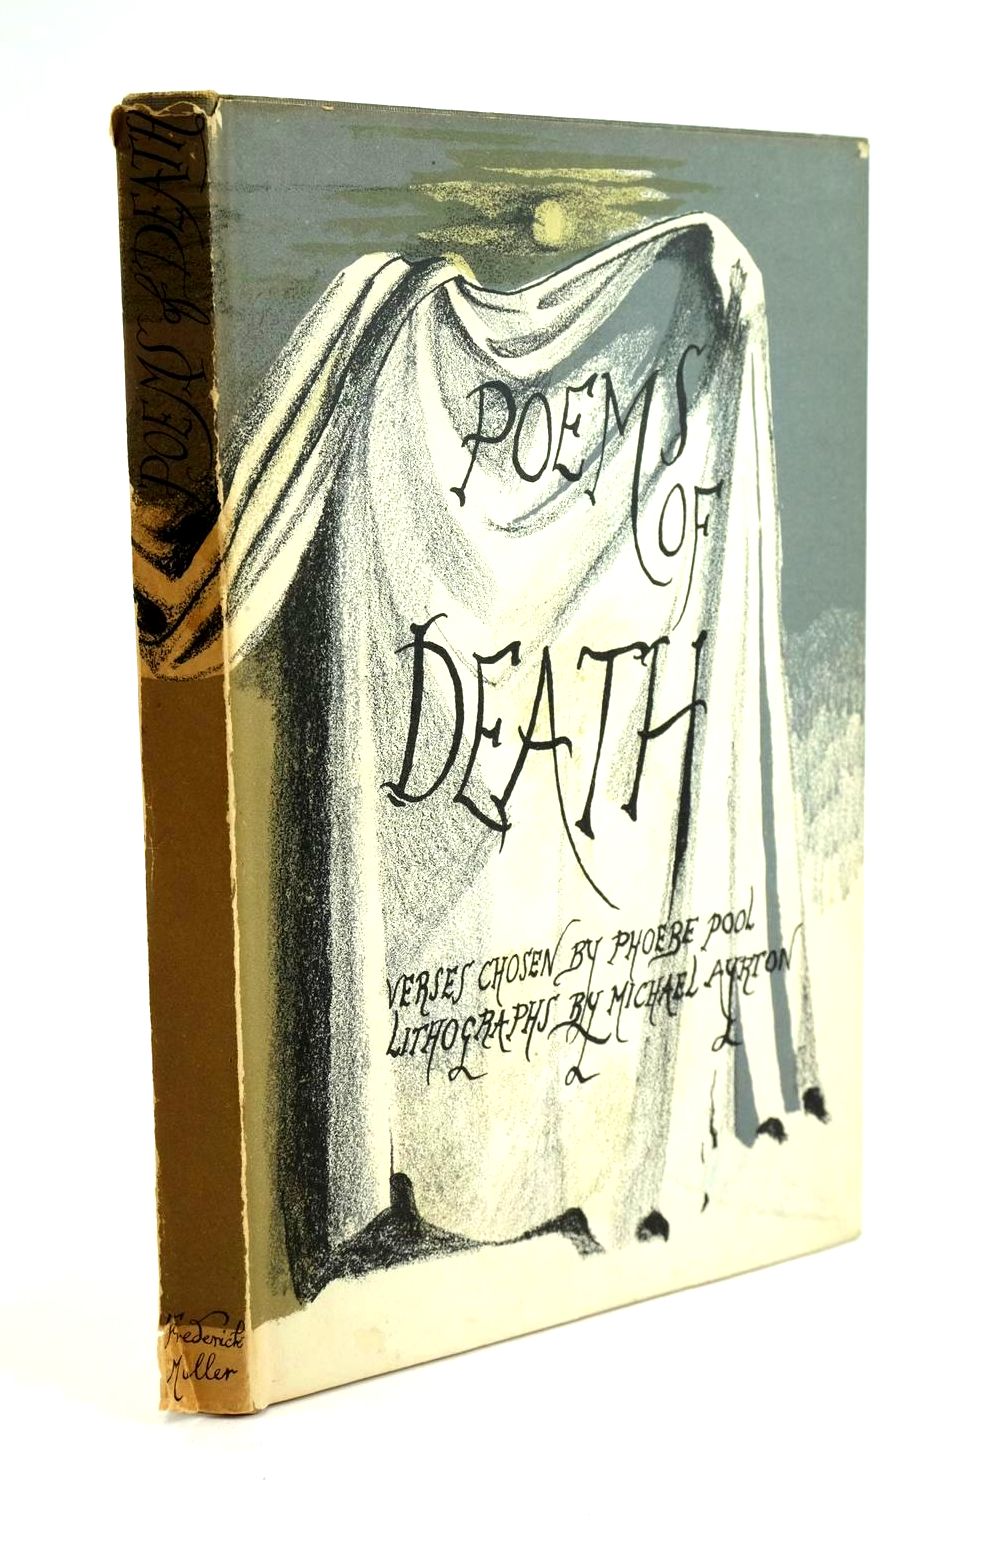 Photo of POEMS OF DEATH written by Pool, Phoebe illustrated by Ayrton, Michael published by Frederick Muller Ltd. (STOCK CODE: 1323378)  for sale by Stella & Rose's Books